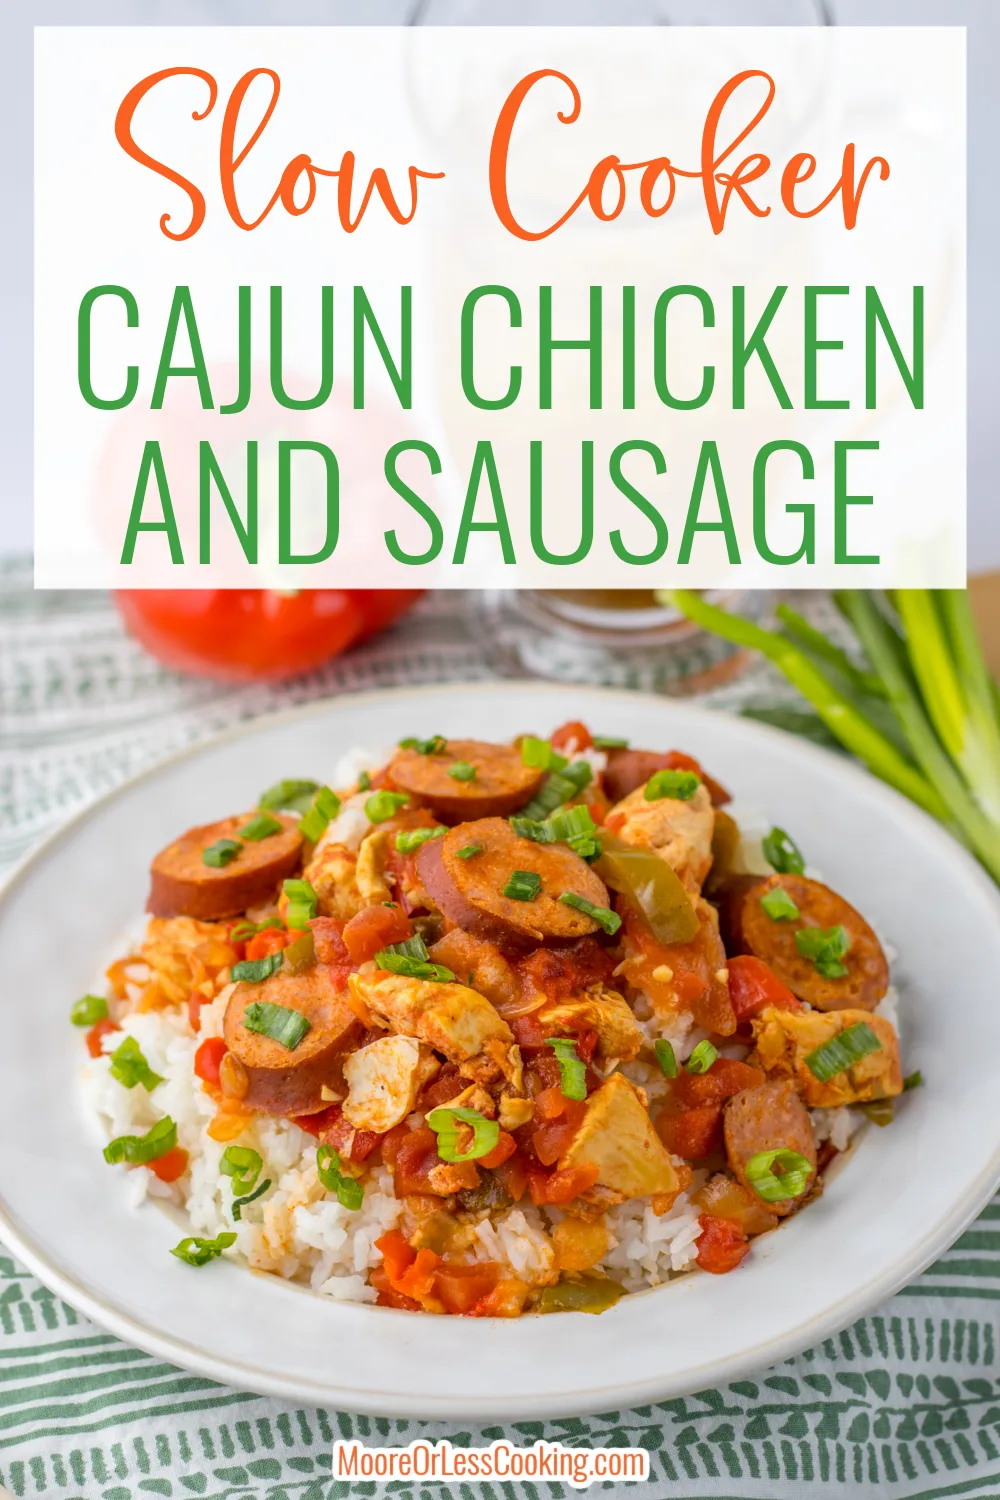 Tender chicken, flavorful sausage and bold spices help bring this slow cooker recipe to a succulent finish using basic ingredients that are seasoned to perfection with a creole flair. via @Mooreorlesscook